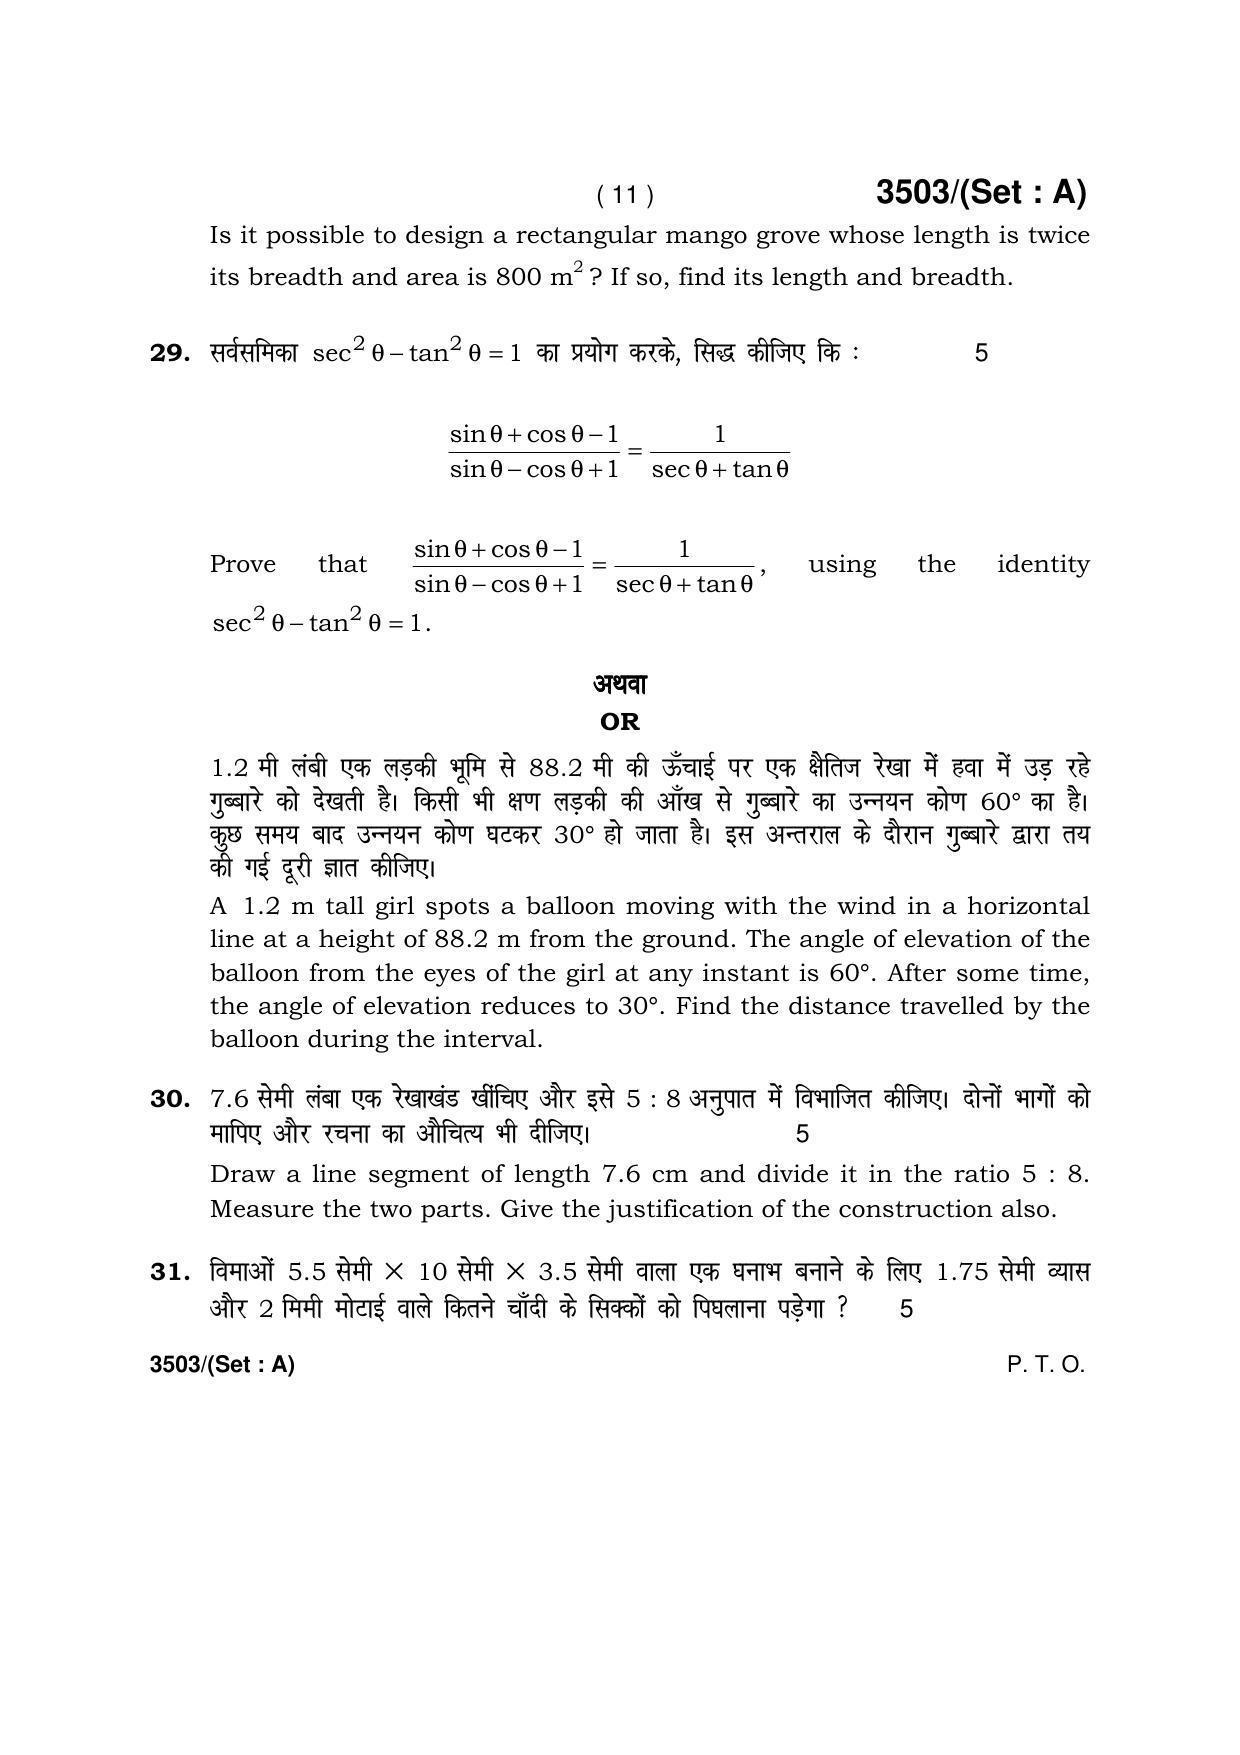 Haryana Board HBSE Class 10 Mathematics -A 2018 Question Paper - Page 11